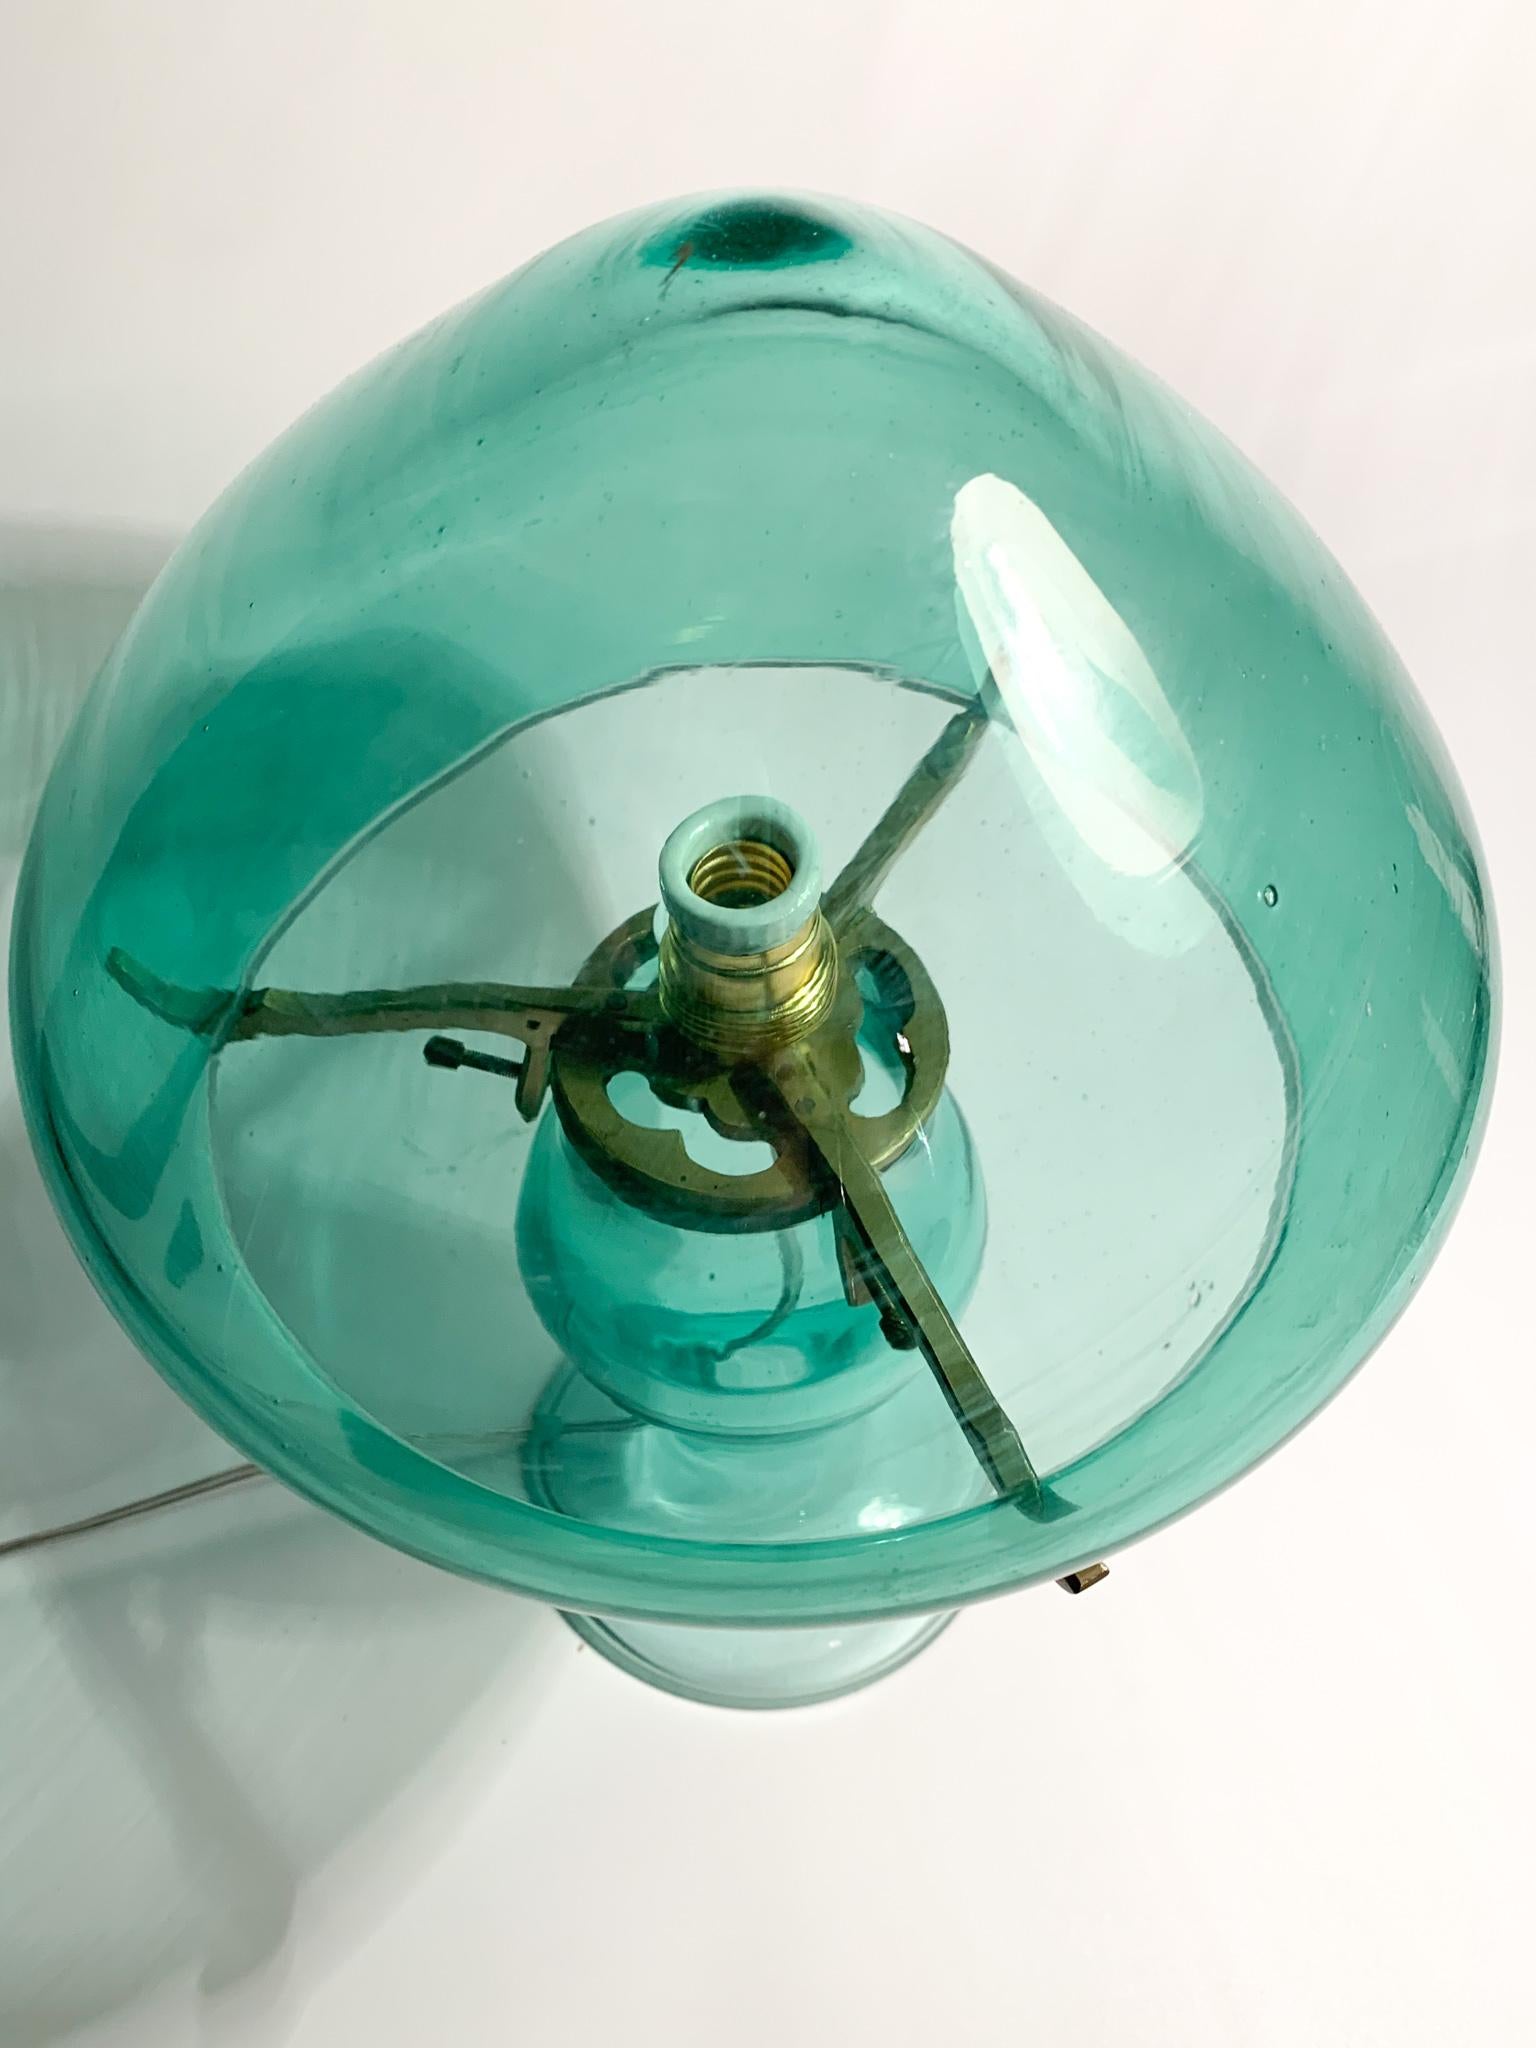 Italian Hand Blown Green Murano Glass Lamp Attributed to Archimede Seguso 1960s For Sale 1